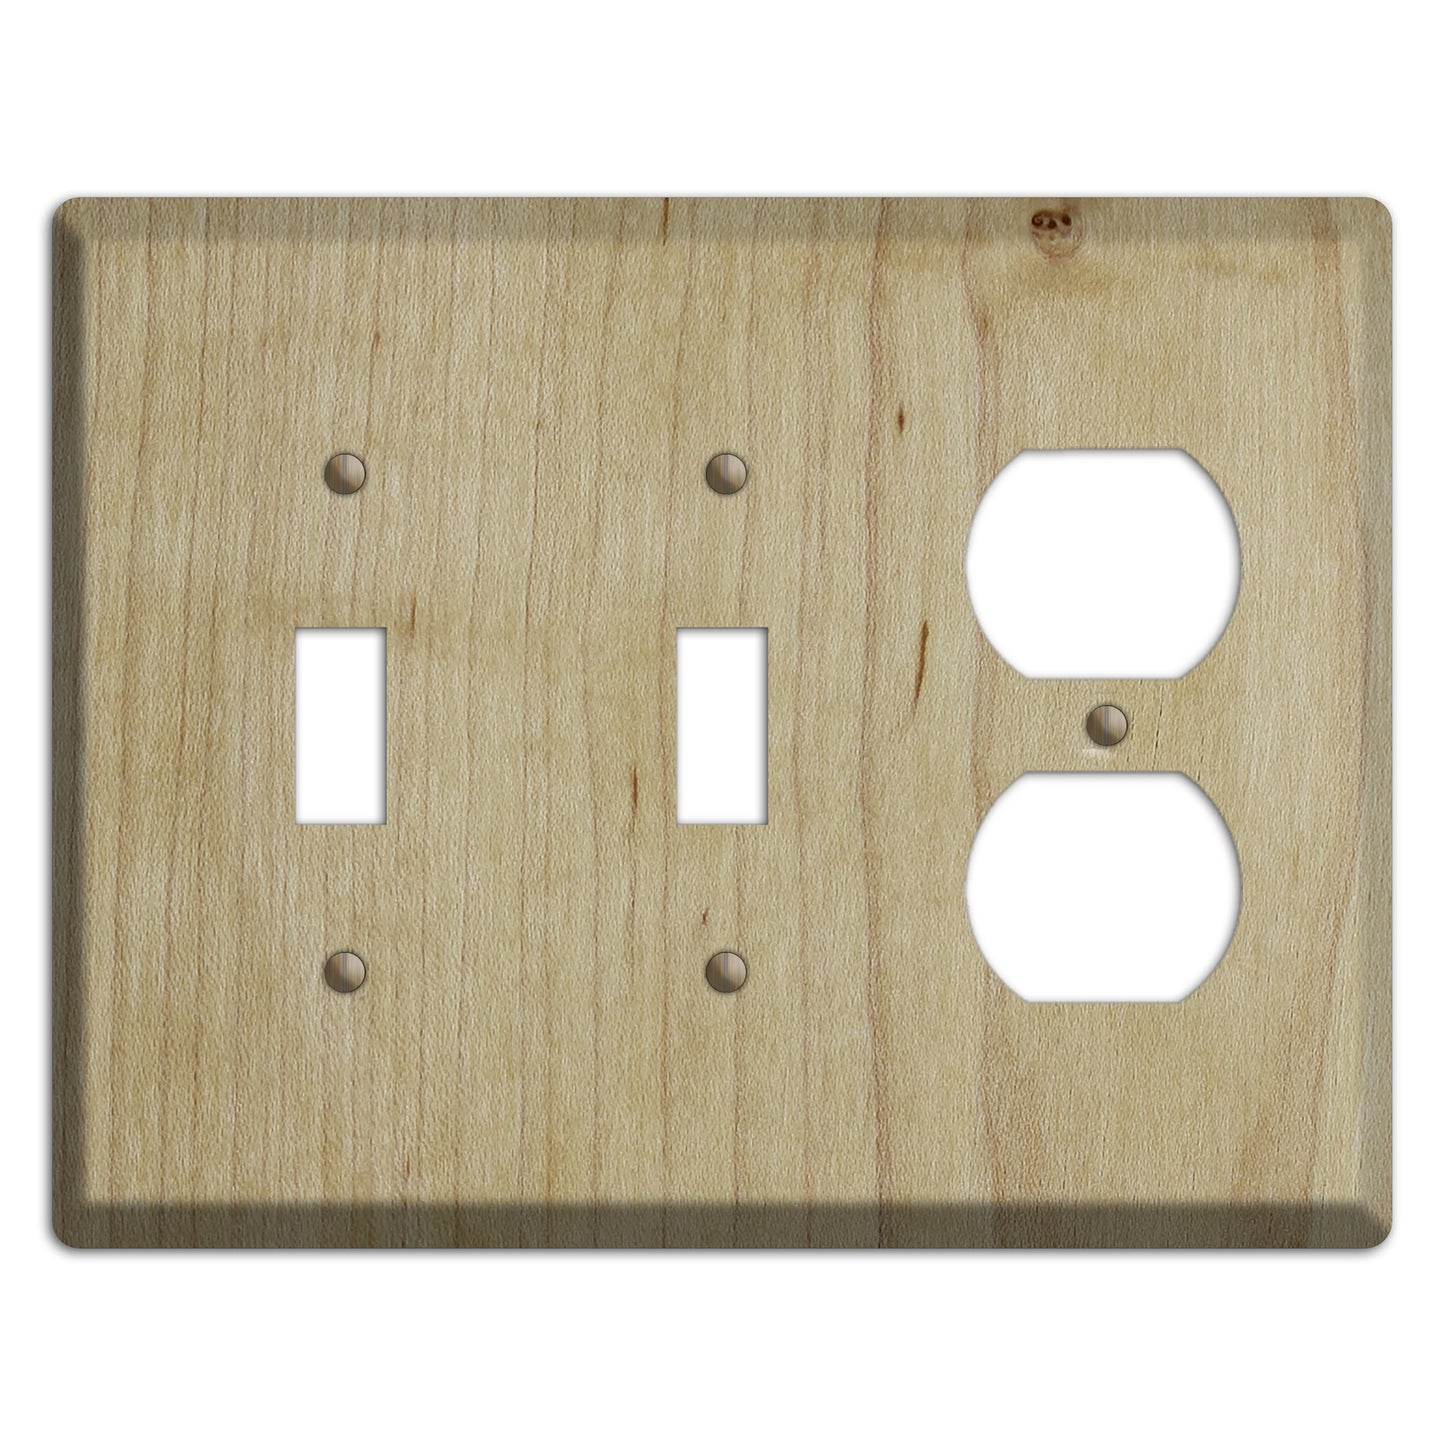 Maple Wood 2 Toggle / Duplex Outlet Cover Plate